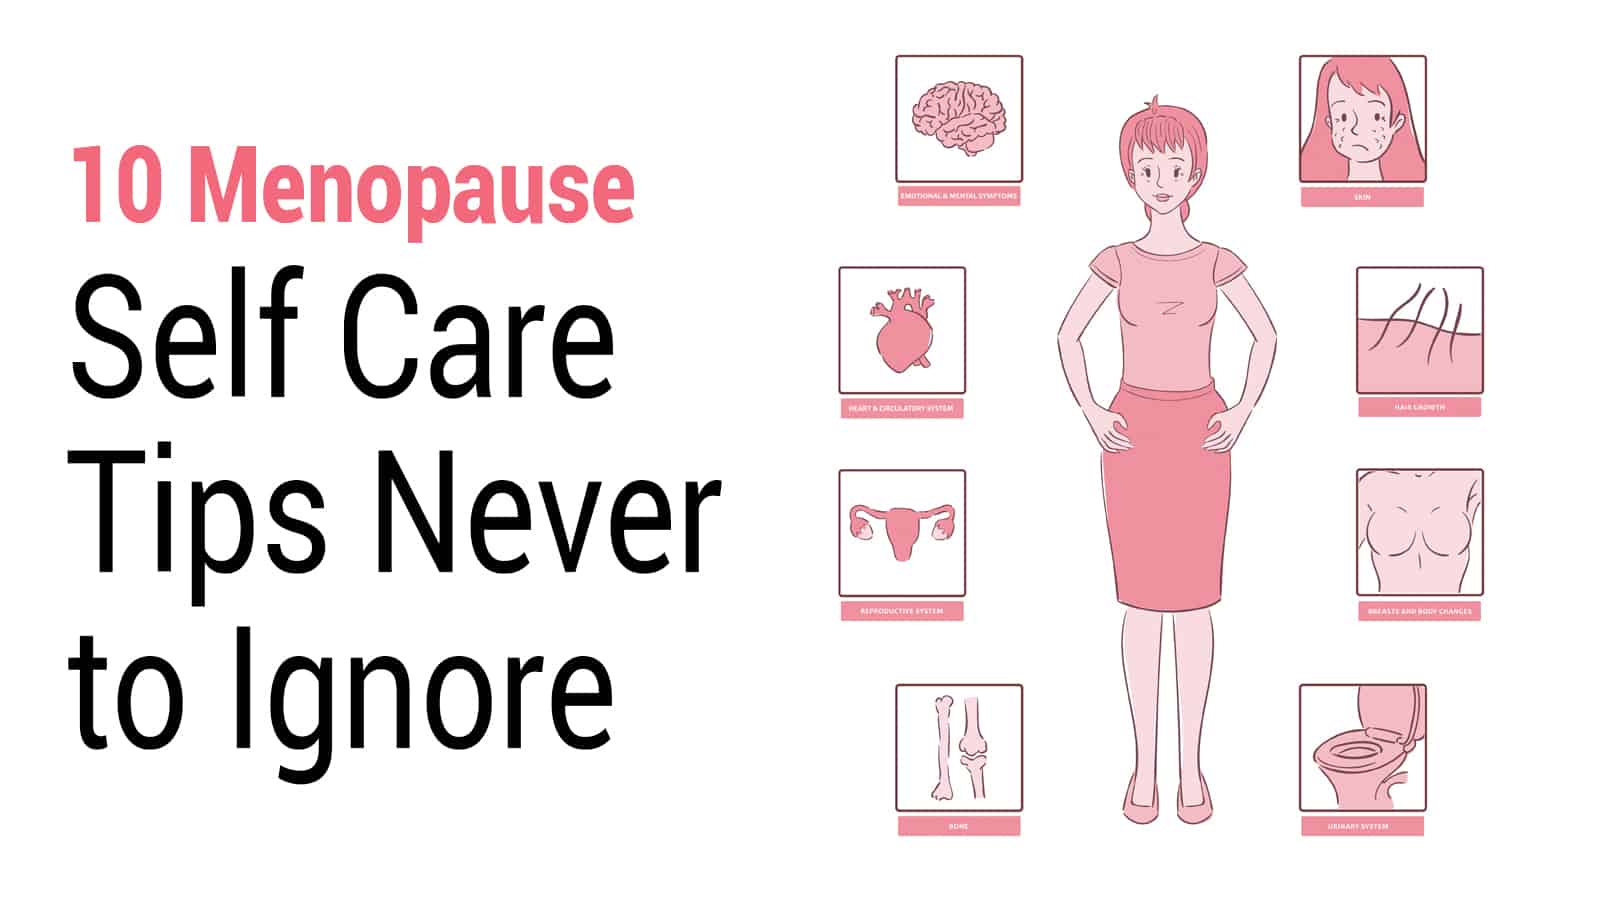 10 Menopause Self Care Tips Never to Ignore